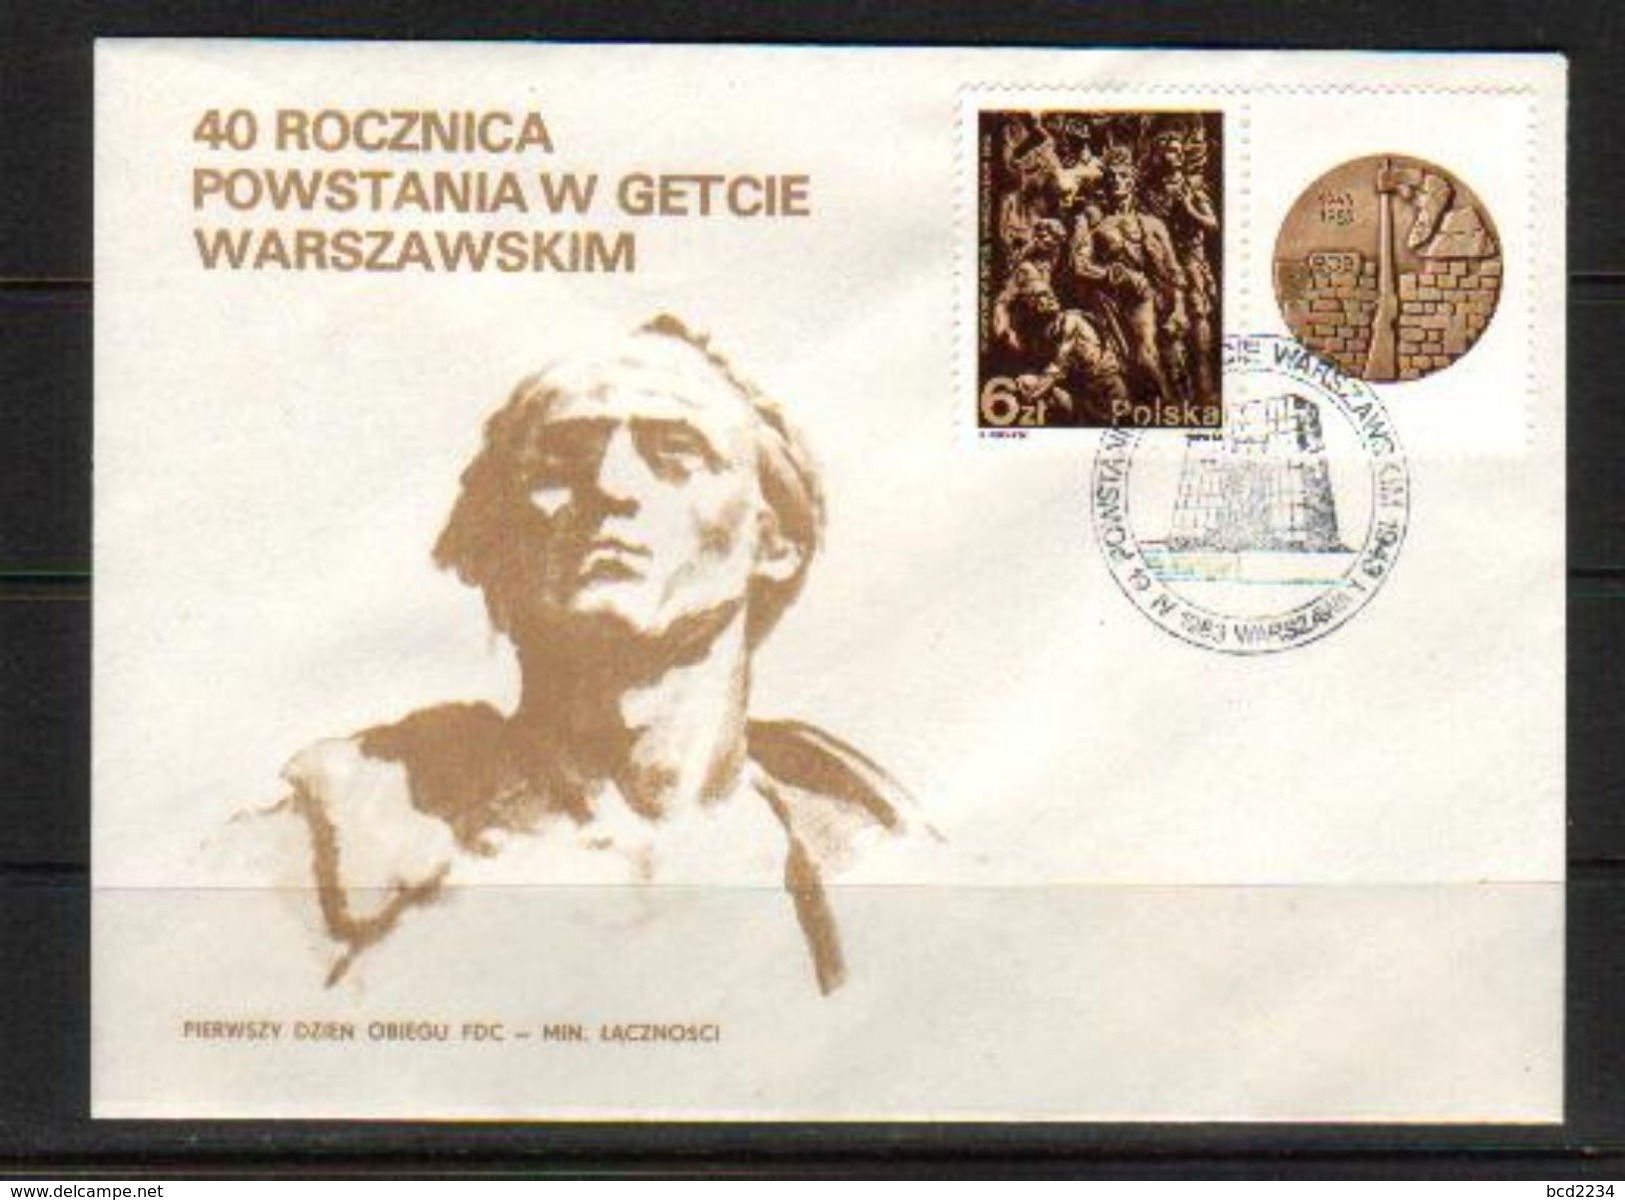 POLAND FDC 1983 WARSAW GHETTO UPRISING AGAINST NAZI GERMANY World War II WW2 Soldiers Resistance Heroes Monument Judaica - FDC